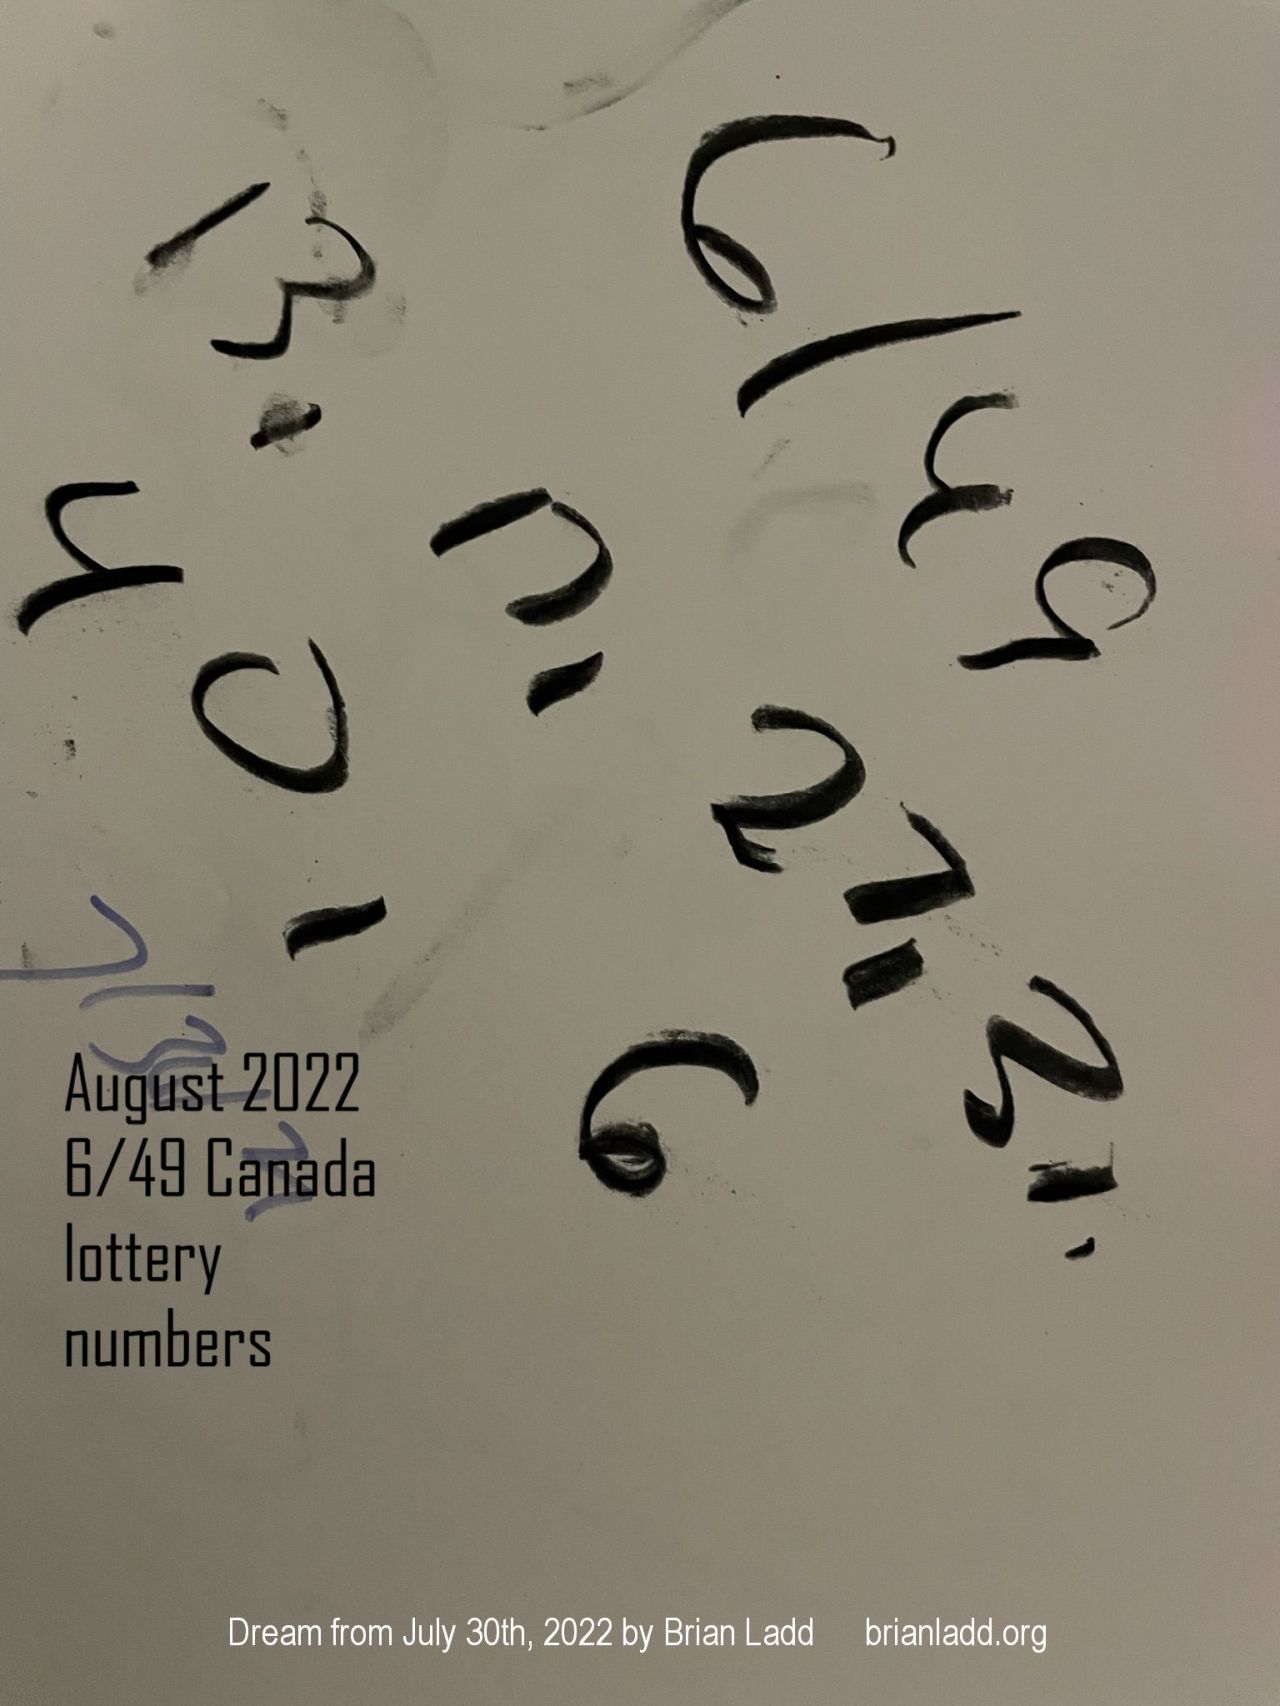 30 July 2022 4   August 2022 6/49 Canada lottery numbers...
August 2022 6/49 Canada lottery numbers.
